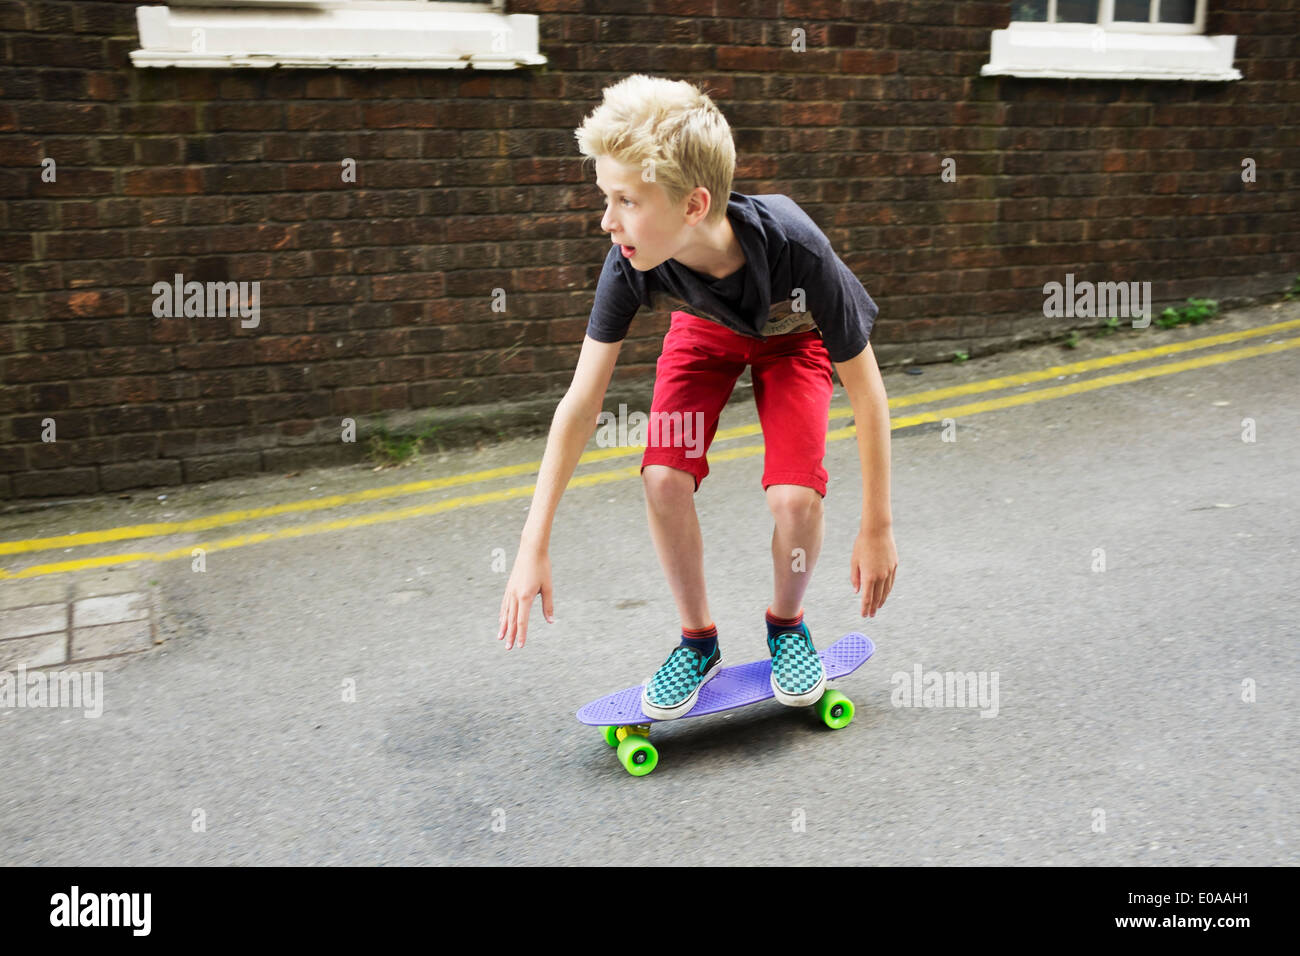 Young Boy Skateboarding High Resolution Stock Photography and Images - Alamy